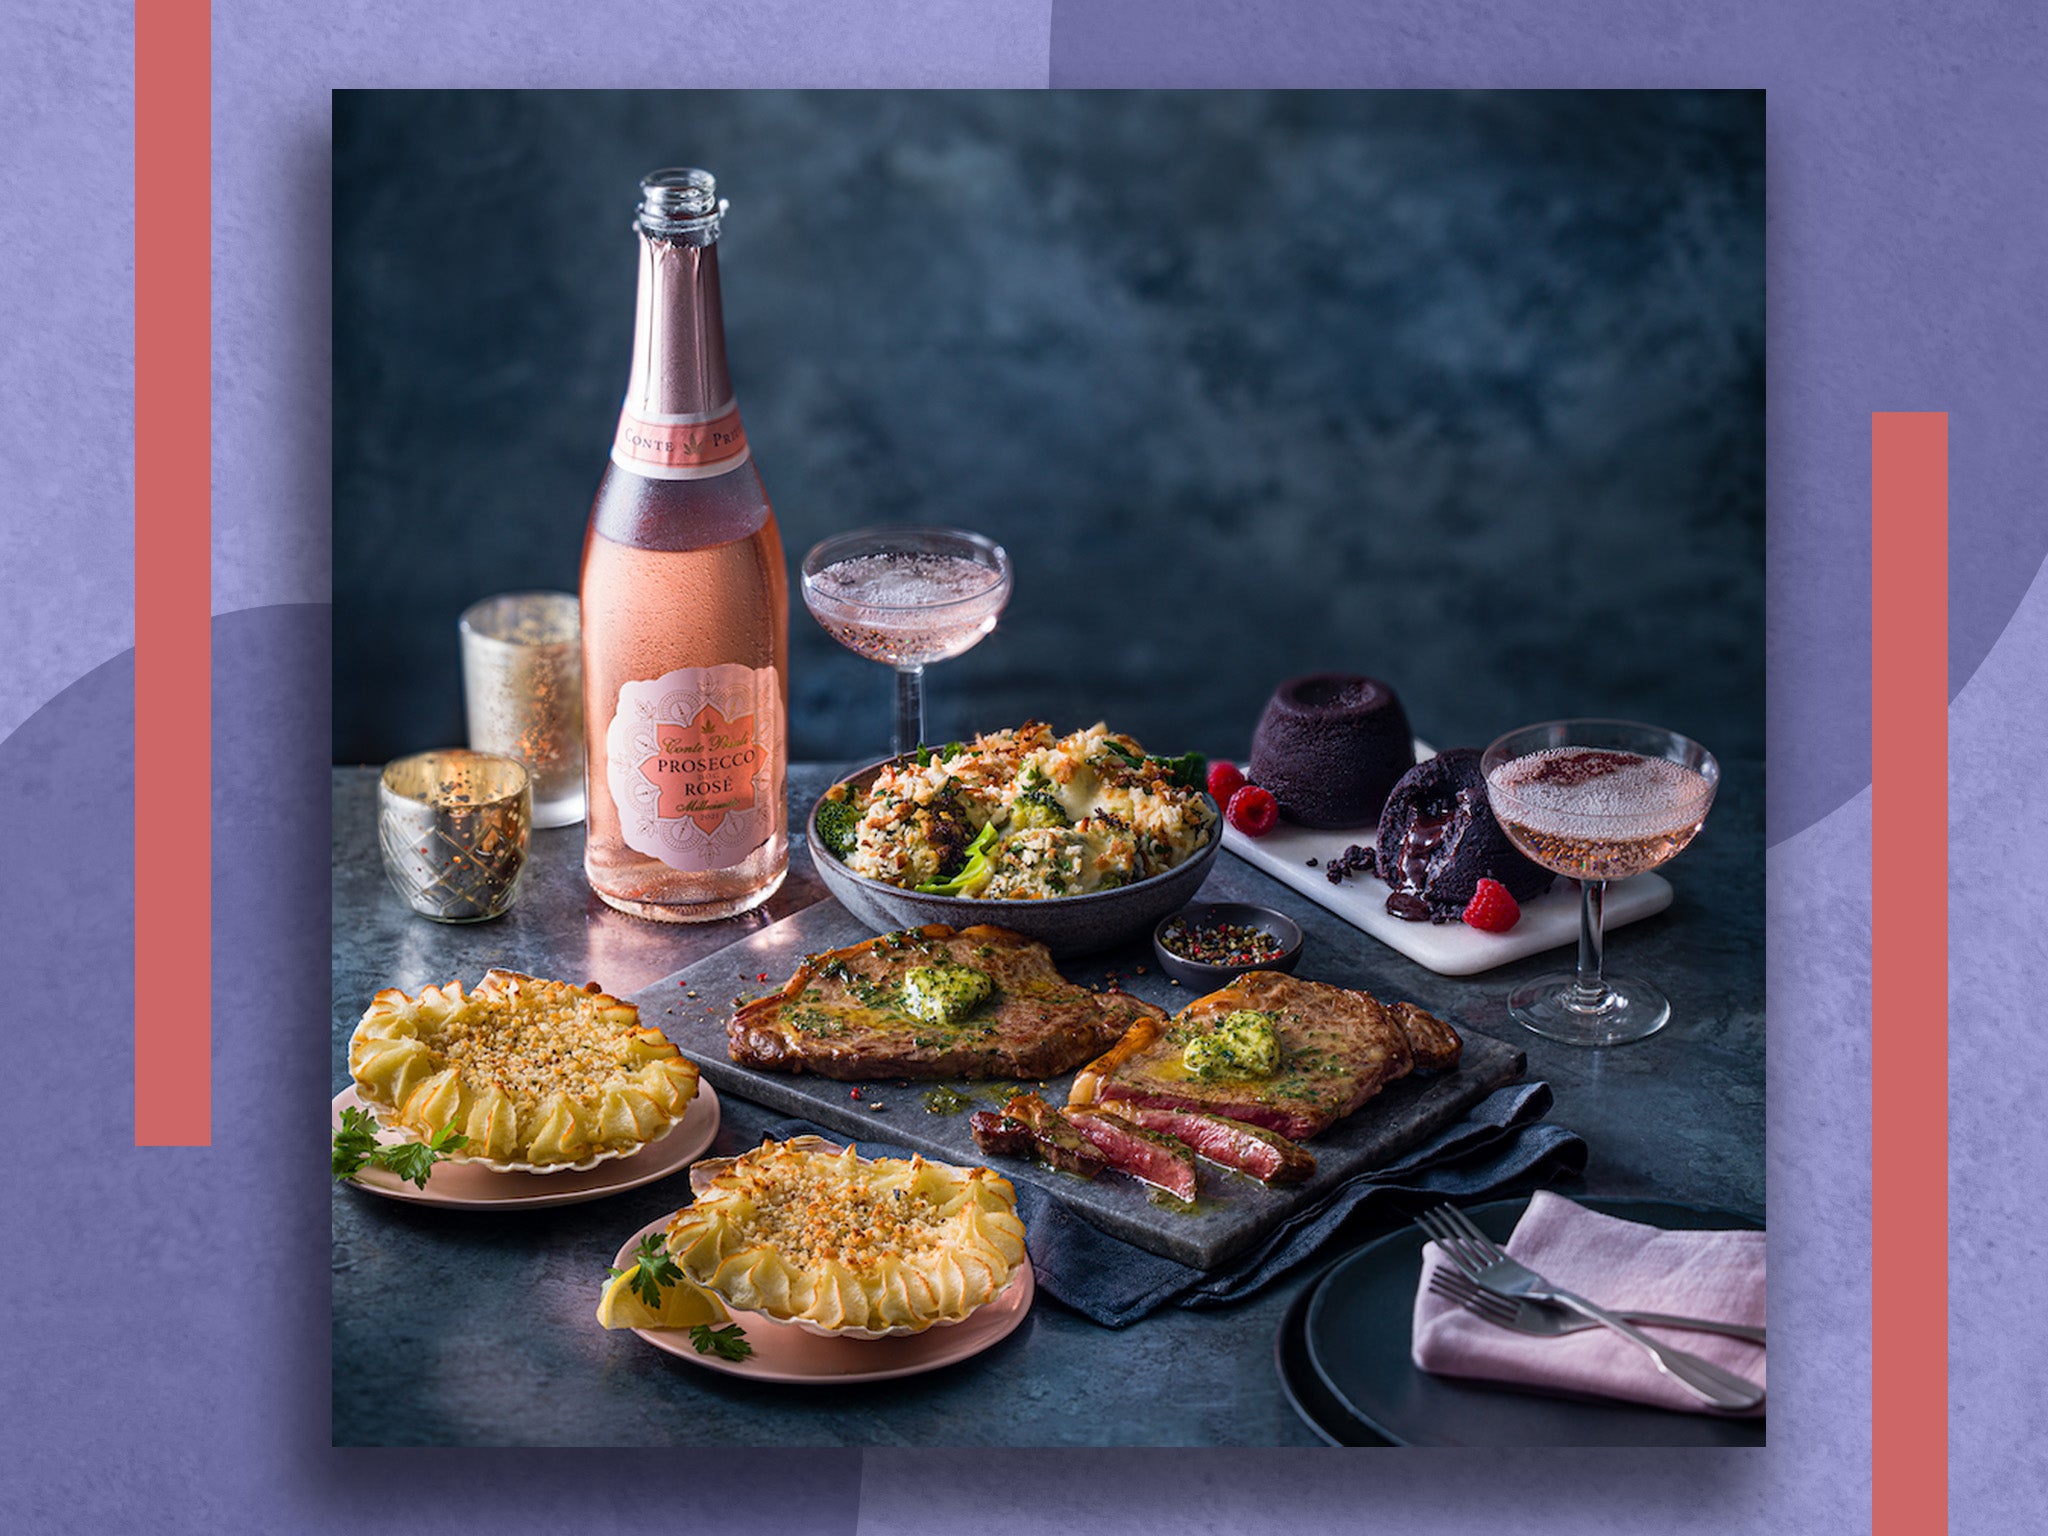 M&S’s £20 Valentine’s meal deal includes a mini cheese selection and alcohol-free rosé